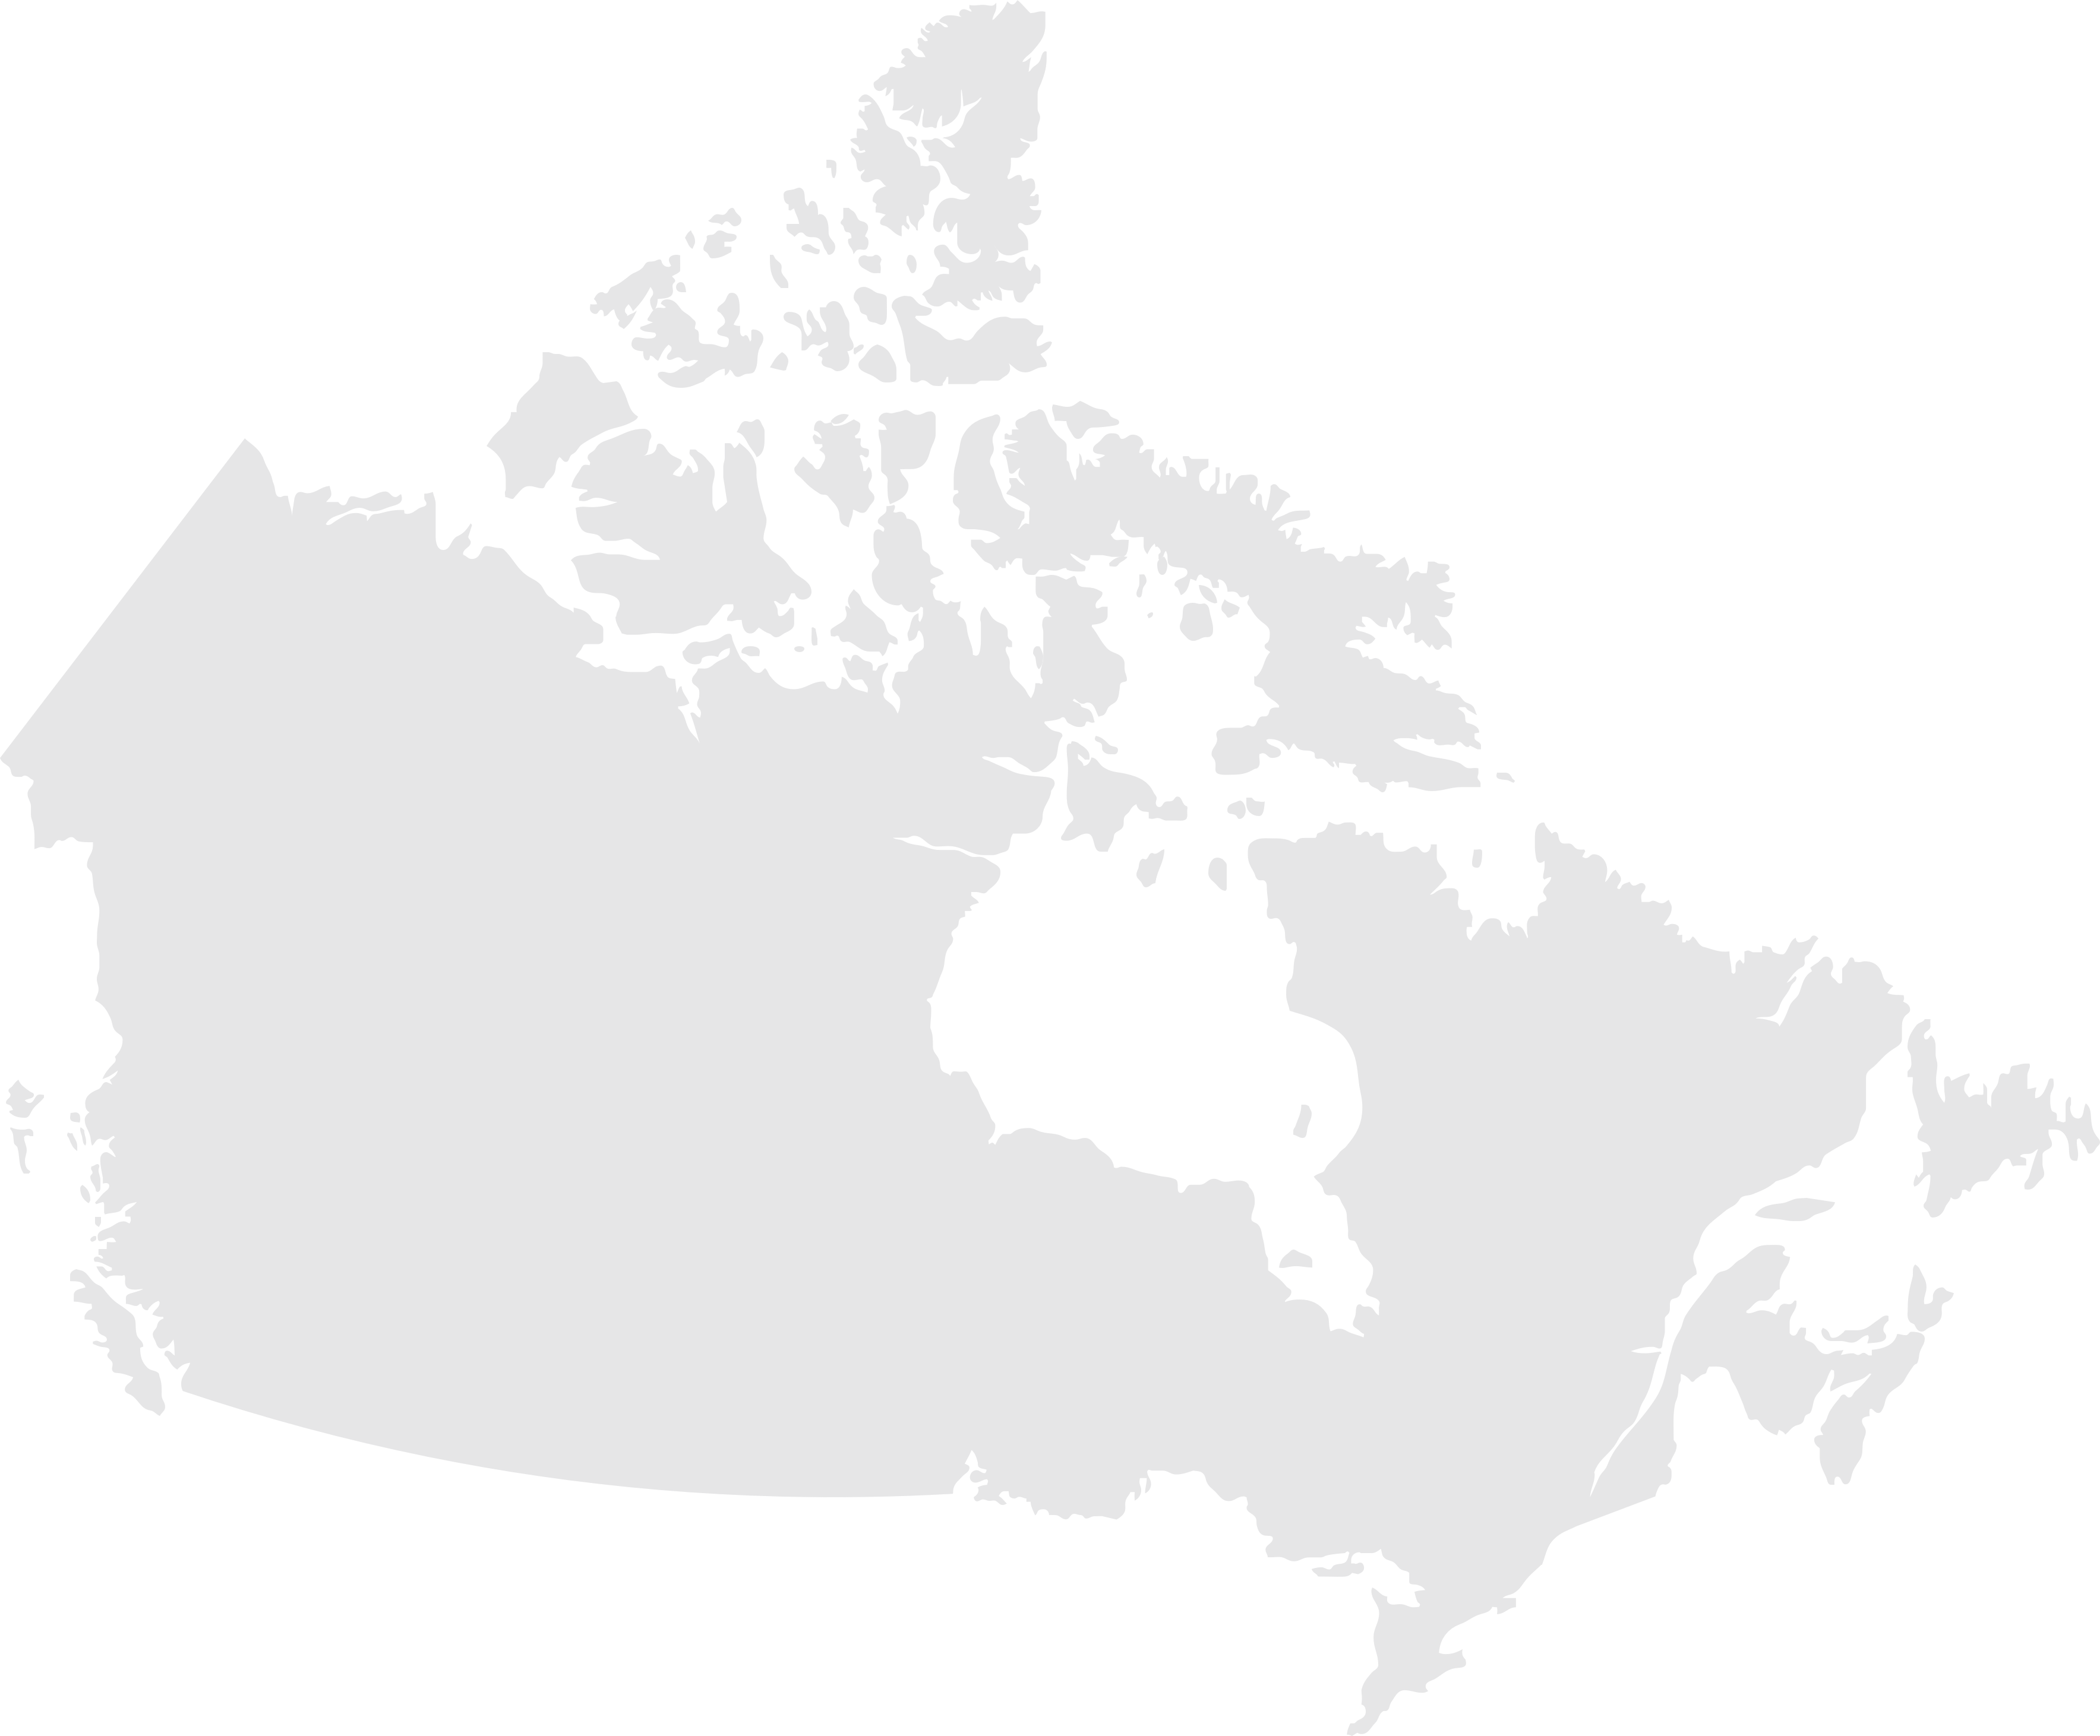 a map of Canada.